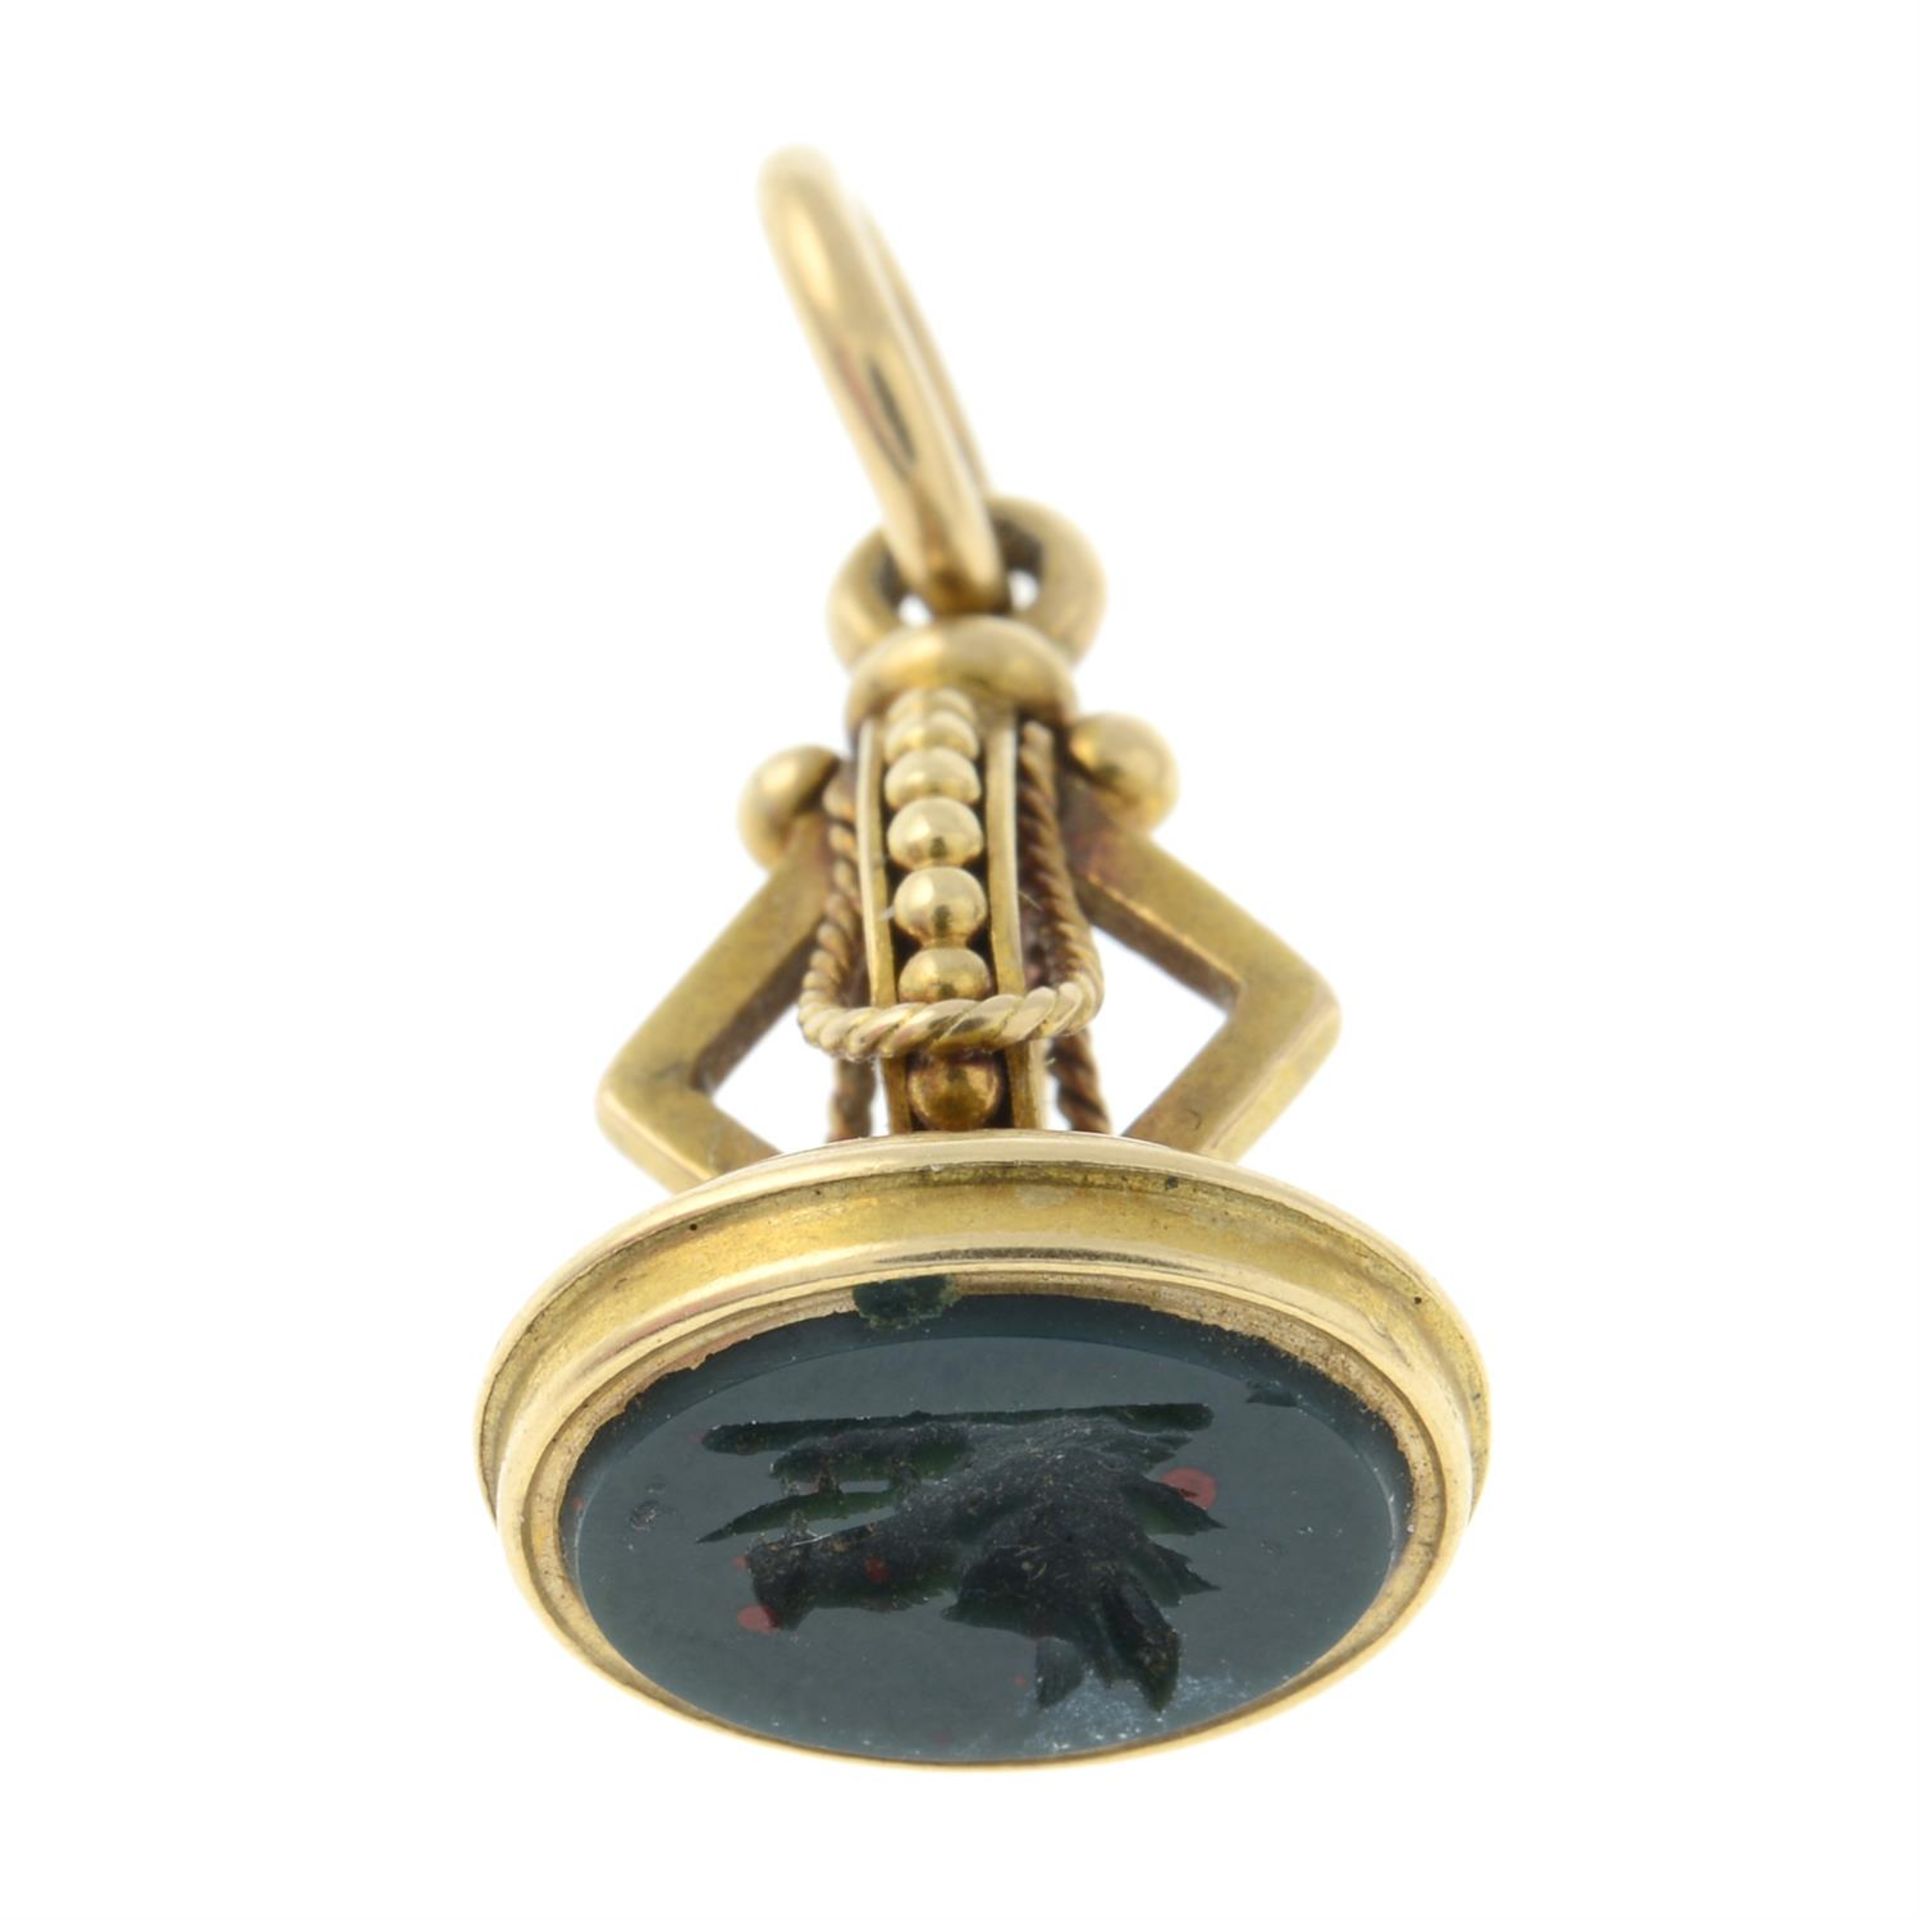 A late Victorian gold decorative fob, with bloodstone seal depicting a boar's head.